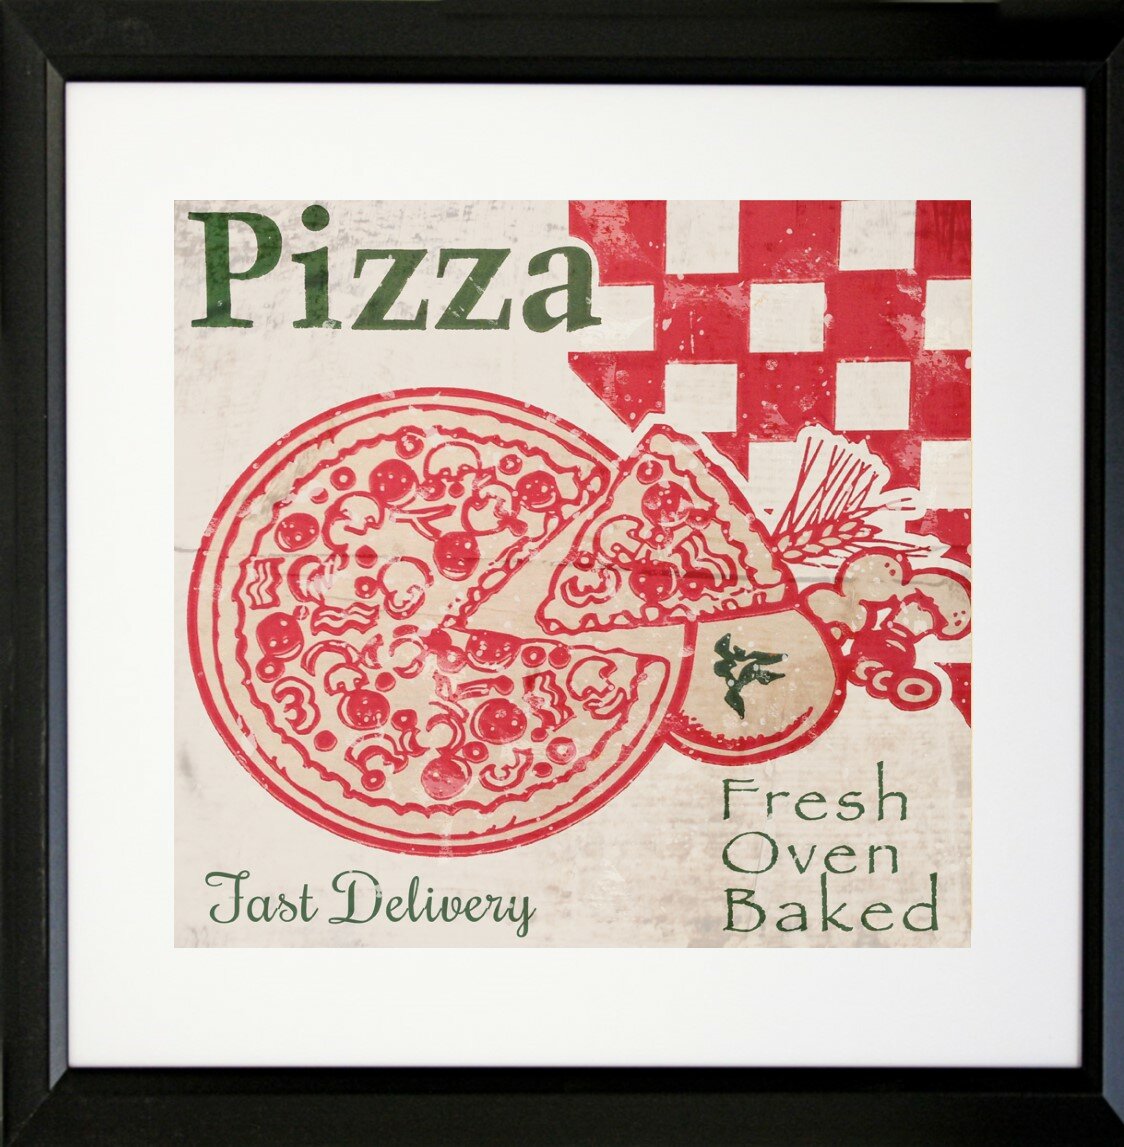 Buy Art for Less 'Pizza Box' Framed Vintage Advertisement Print, Red